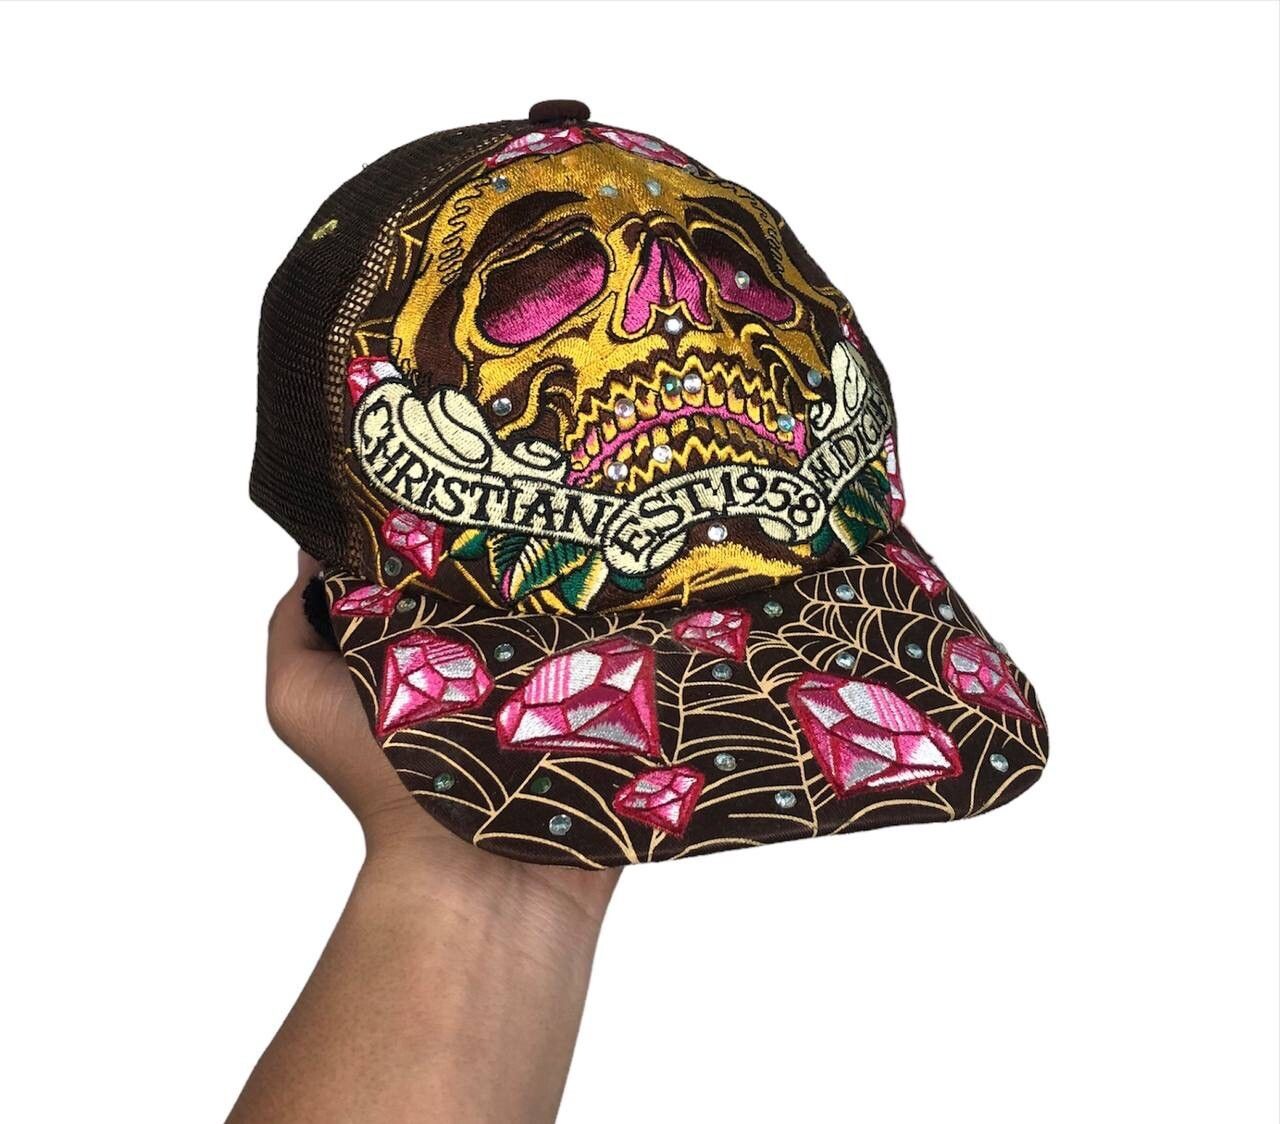 Pre-owned Christian Audigier X Ed Hardy Hot Christian Audigier Ed Hardy Trucker Hat Skull Cap In Brown